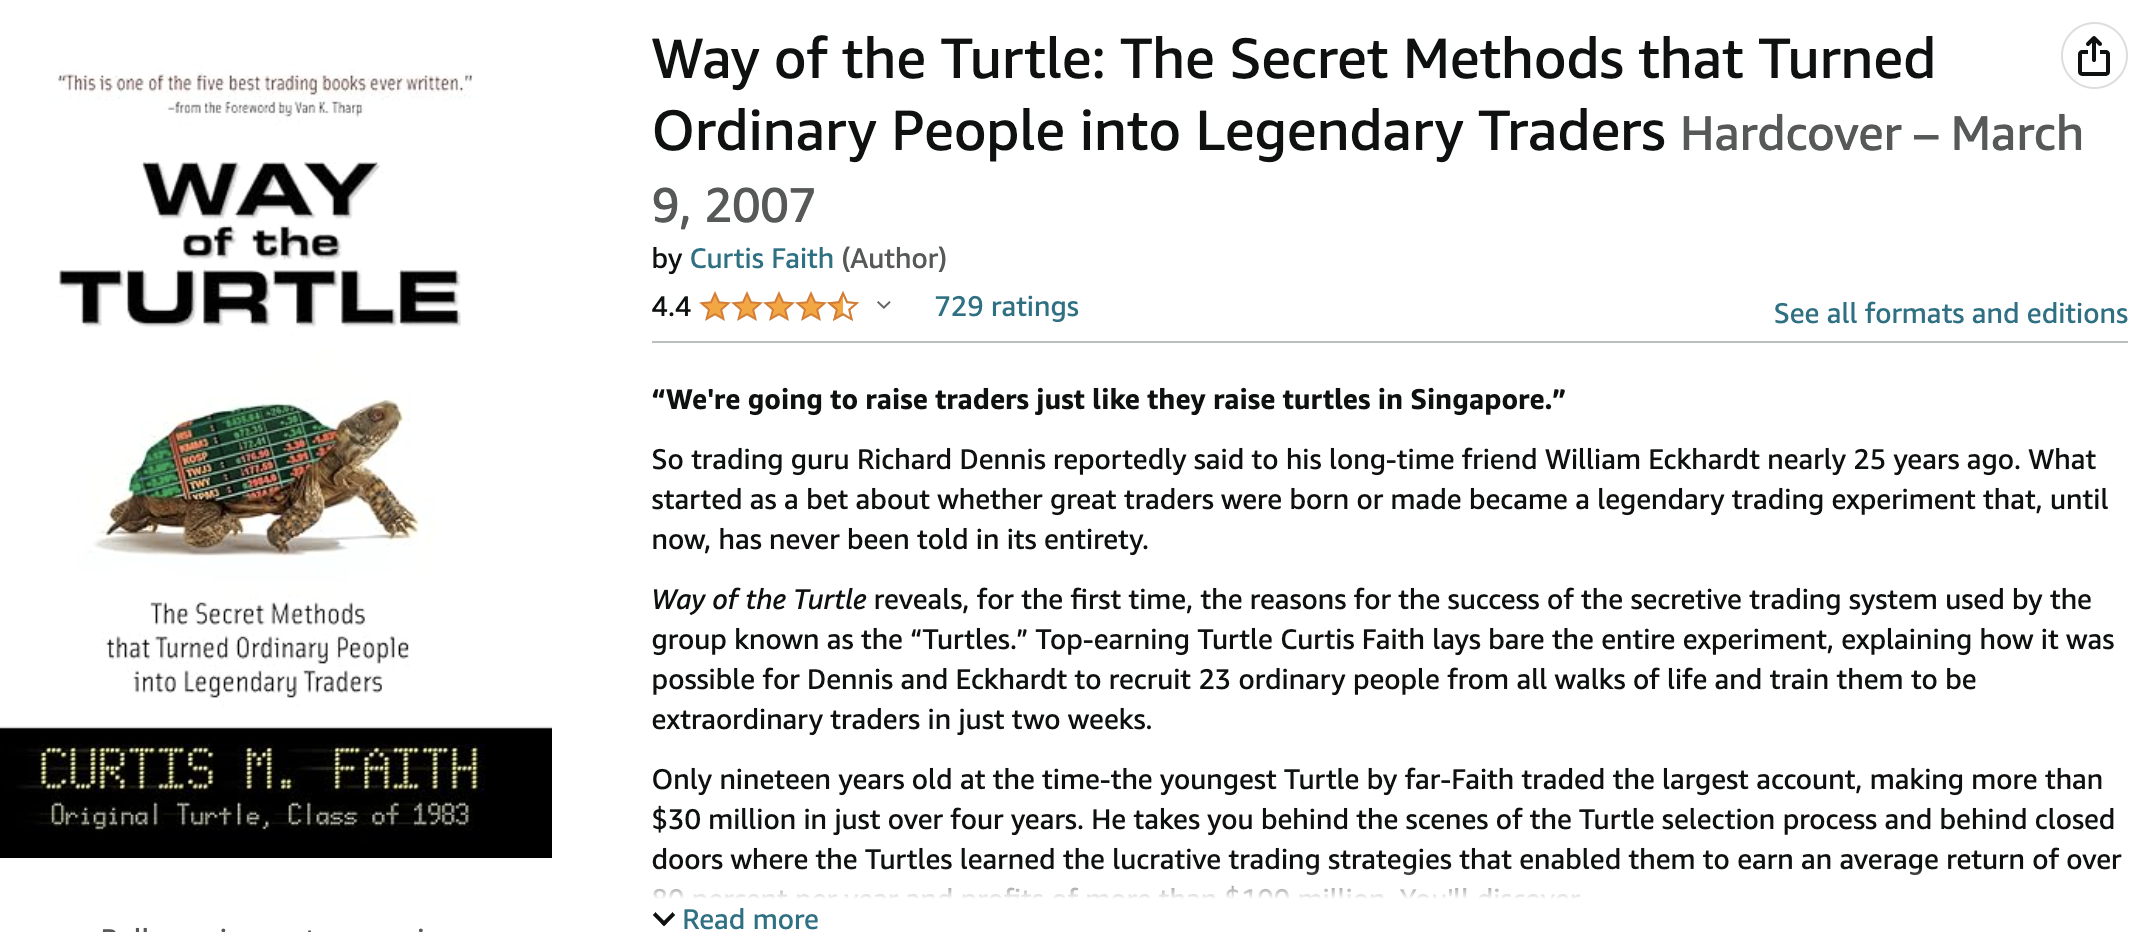 Books for Stock Traders: “Way of the Turtle: The Secret Methods That Turned Ordinary People Into Legendary Traders” by Curtis Faith